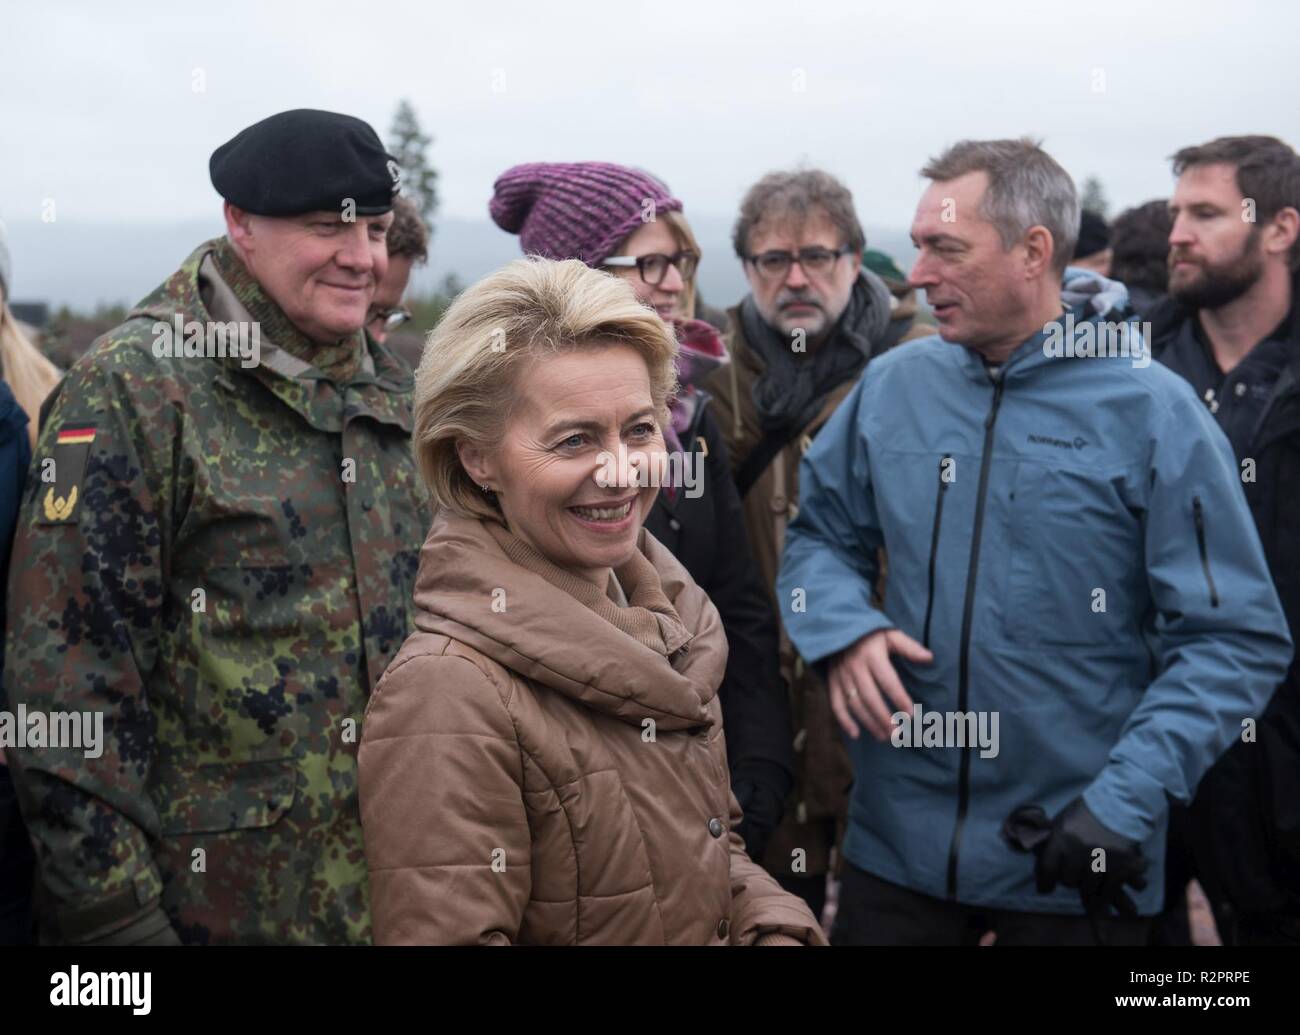 German Minister of Defense, Ursula von der Leyen visited the Very High Readiness Joint Task Force today, to which Germany is the main contributor. During exercise Trident Juncture they will be certified for the NATO Response Force 2019.    With around 50,000 personnel participating in Trident Juncture 2018, it is one of the largest NATO exercises in recent years. Around 250 aircraft, 65 vessels and more than 10,000 vehicles are involved in the exercise in Norway. Stock Photo